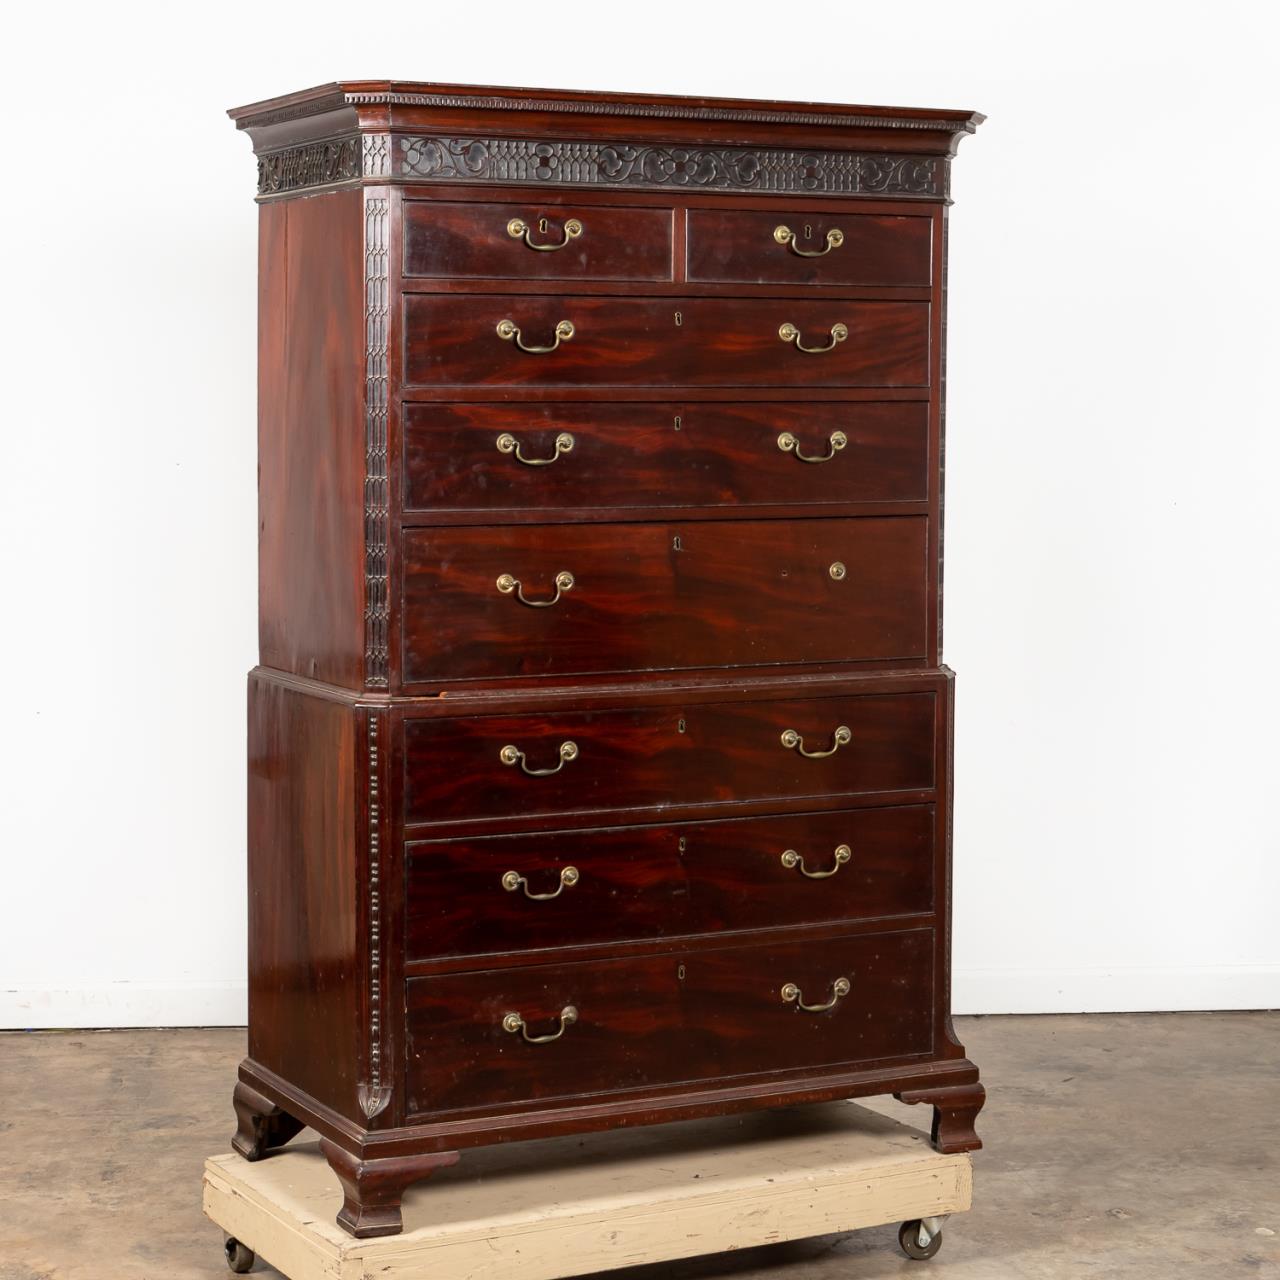 CHIPPENDALE STYLE MAHOGANY CHEST 35b015